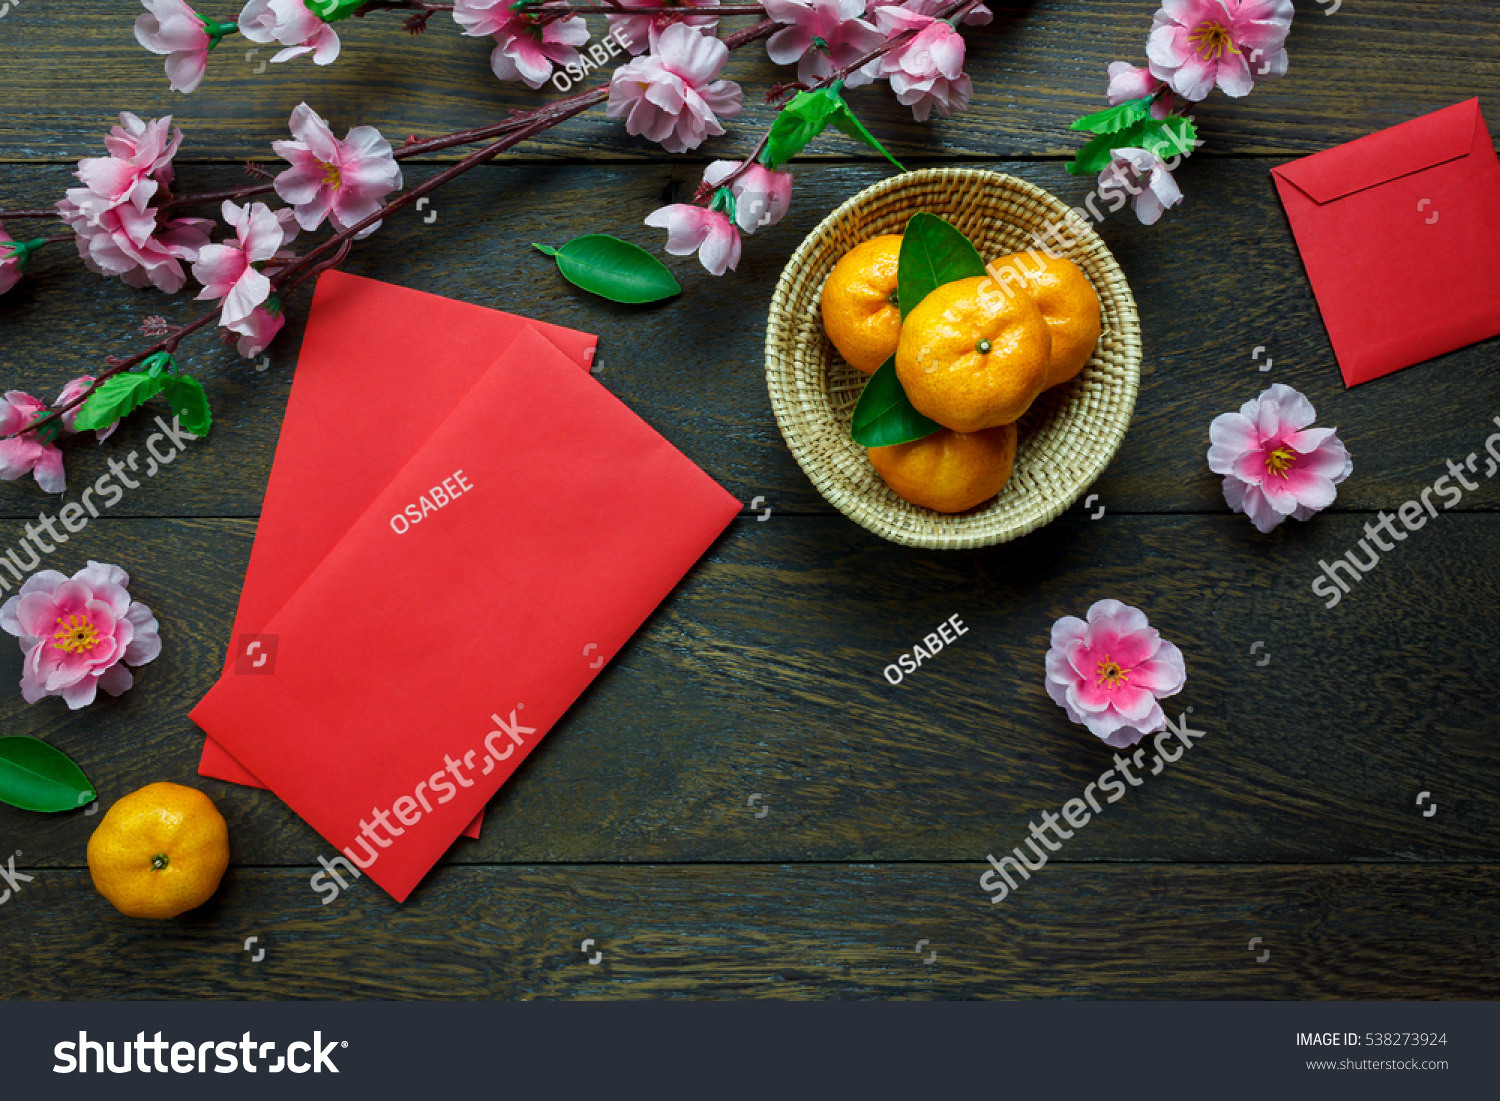 Top view accessories Chinese new year festival decorations.orange,leaf,wood basket,red packet,plum blossom on table wooden background with copy space. #538273924